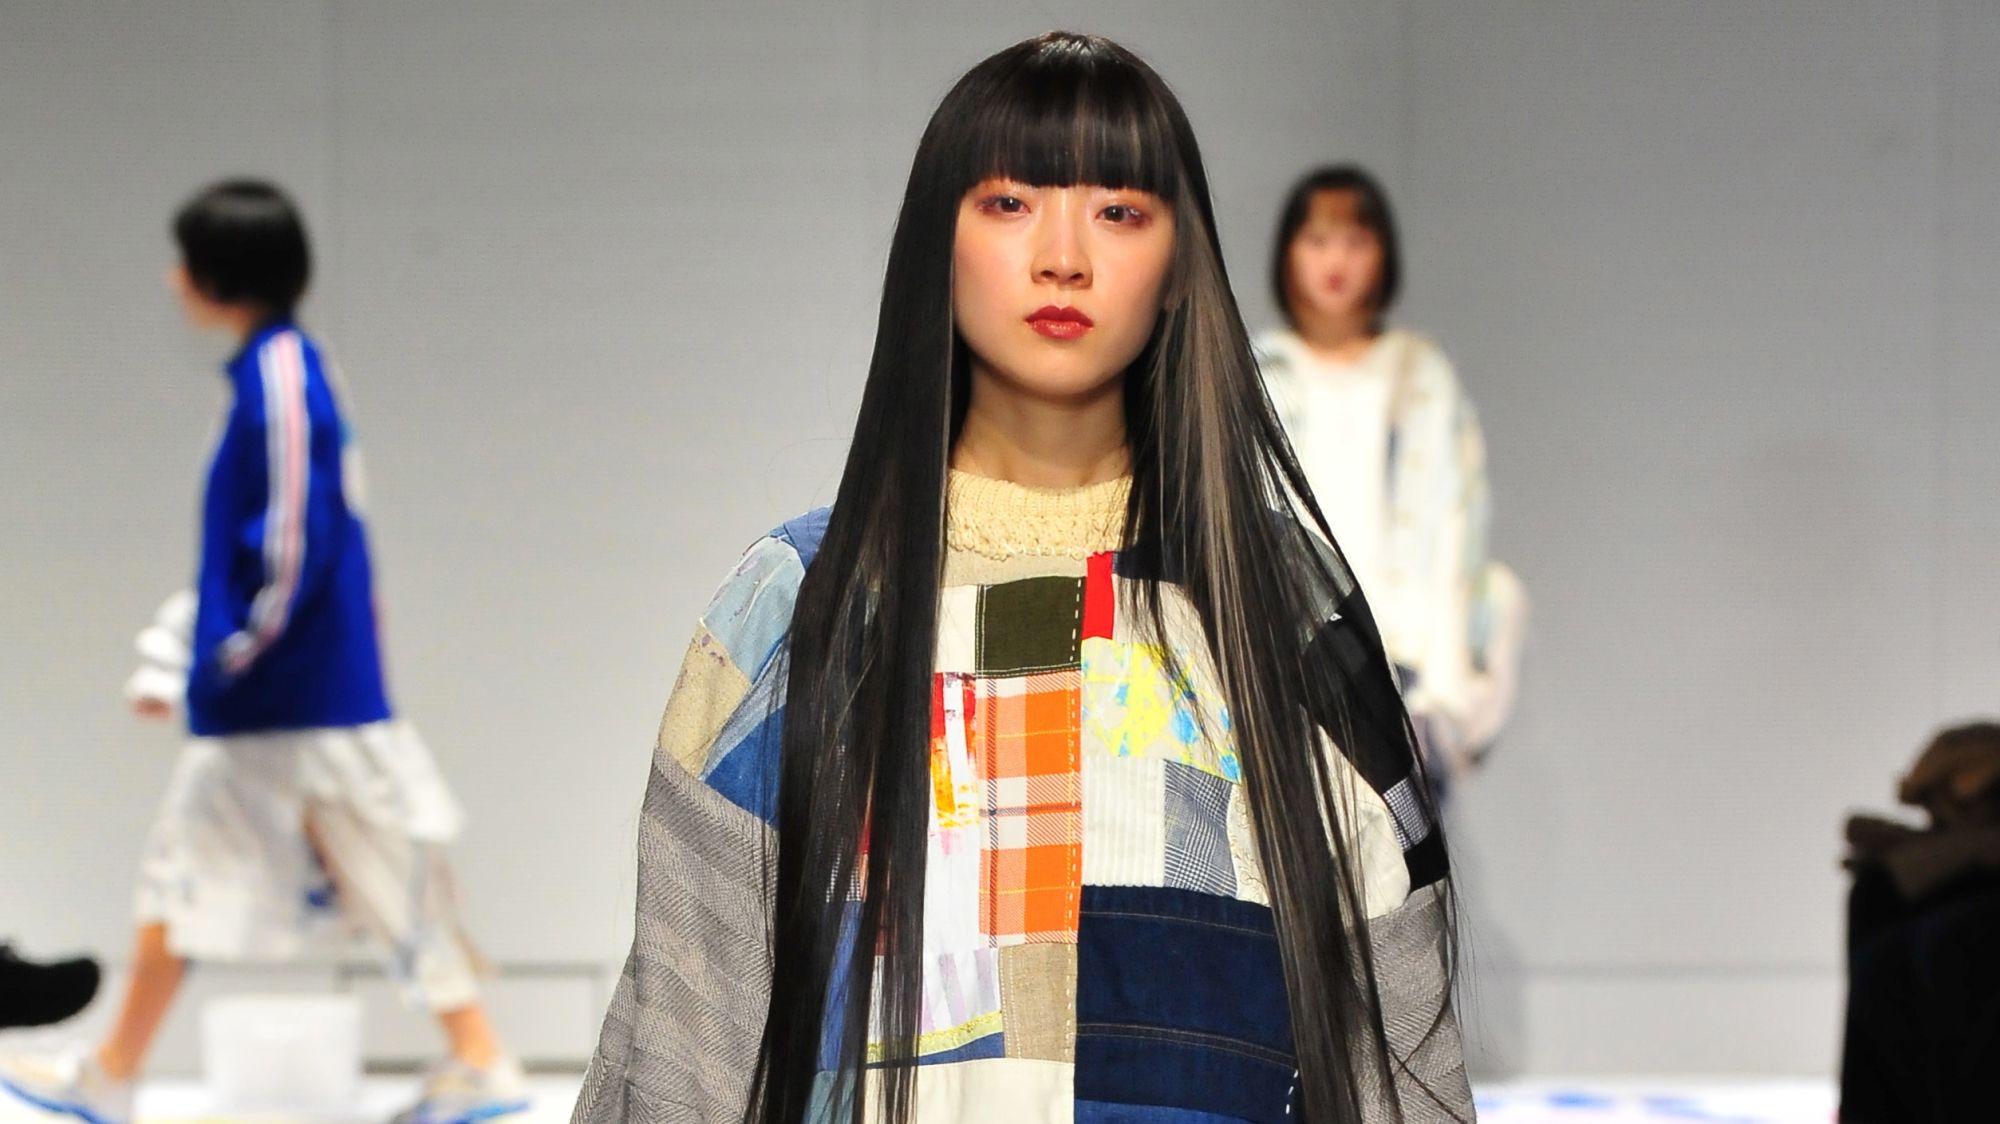 With tradition and new tech, these Japanese designers are crafting